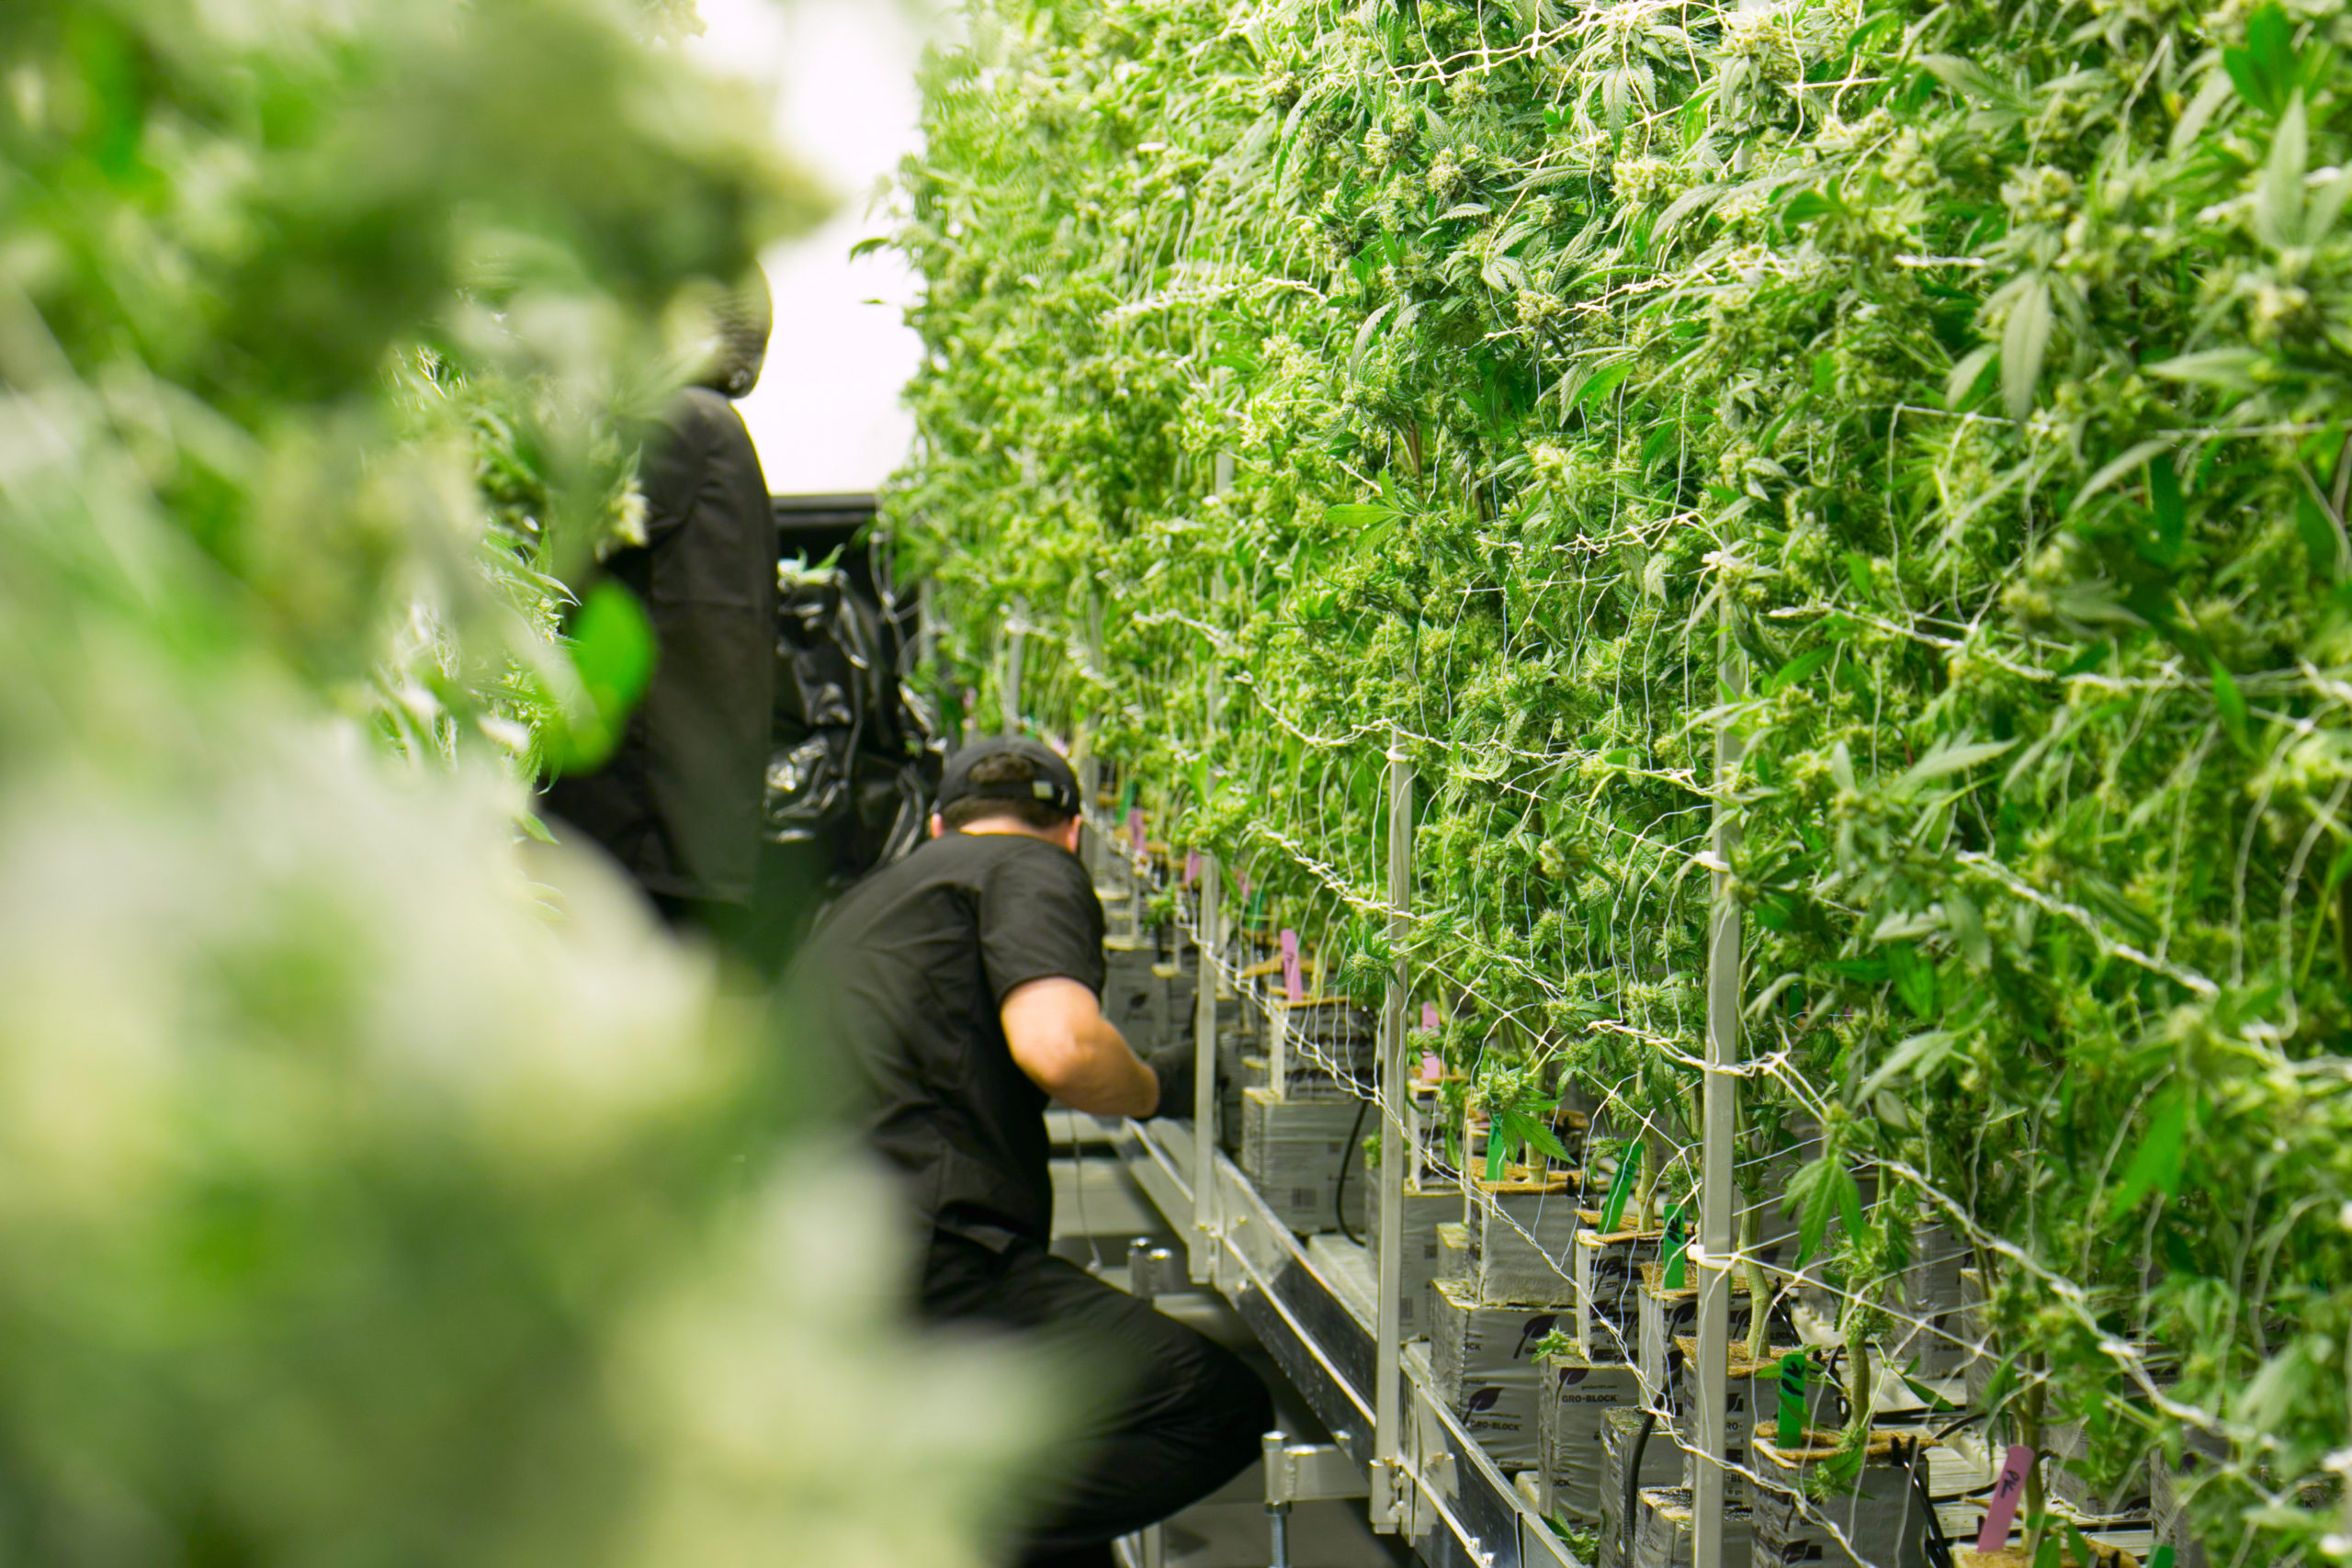 Michigan is on Track to Recover 7,000 Weed Industry Jobs.